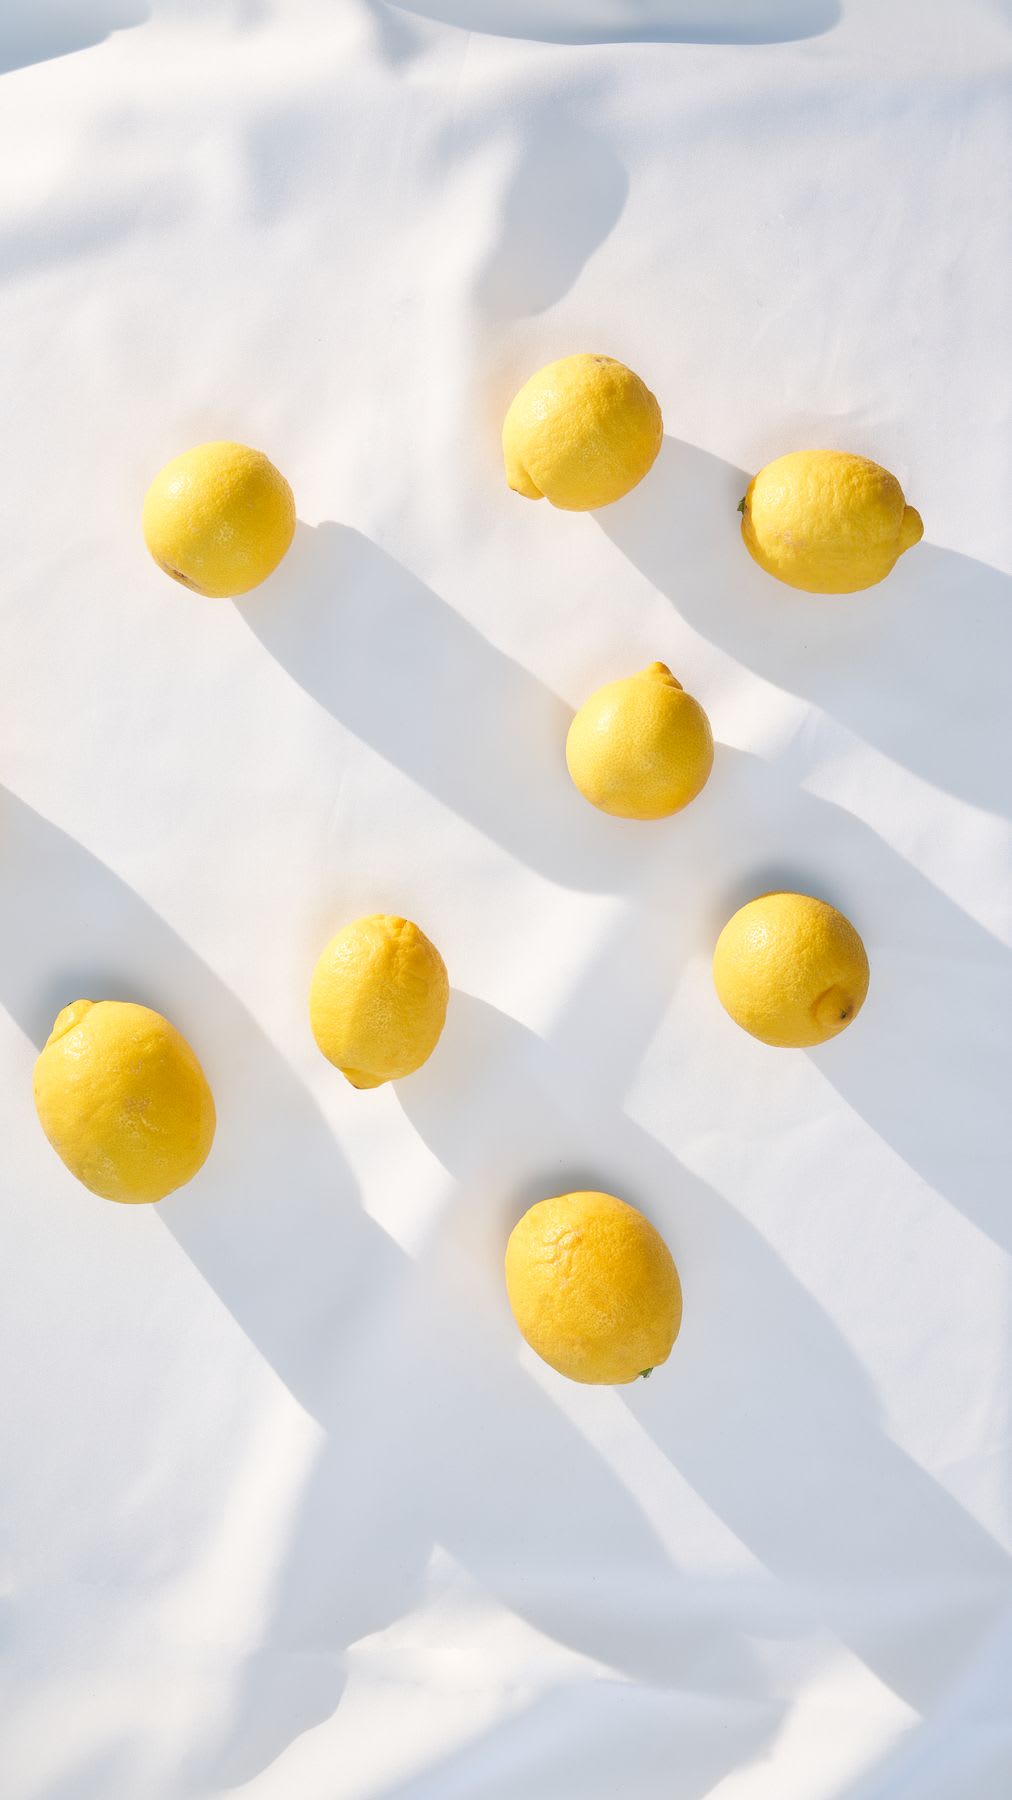 Yellow lemons scattered across a white textured surface.